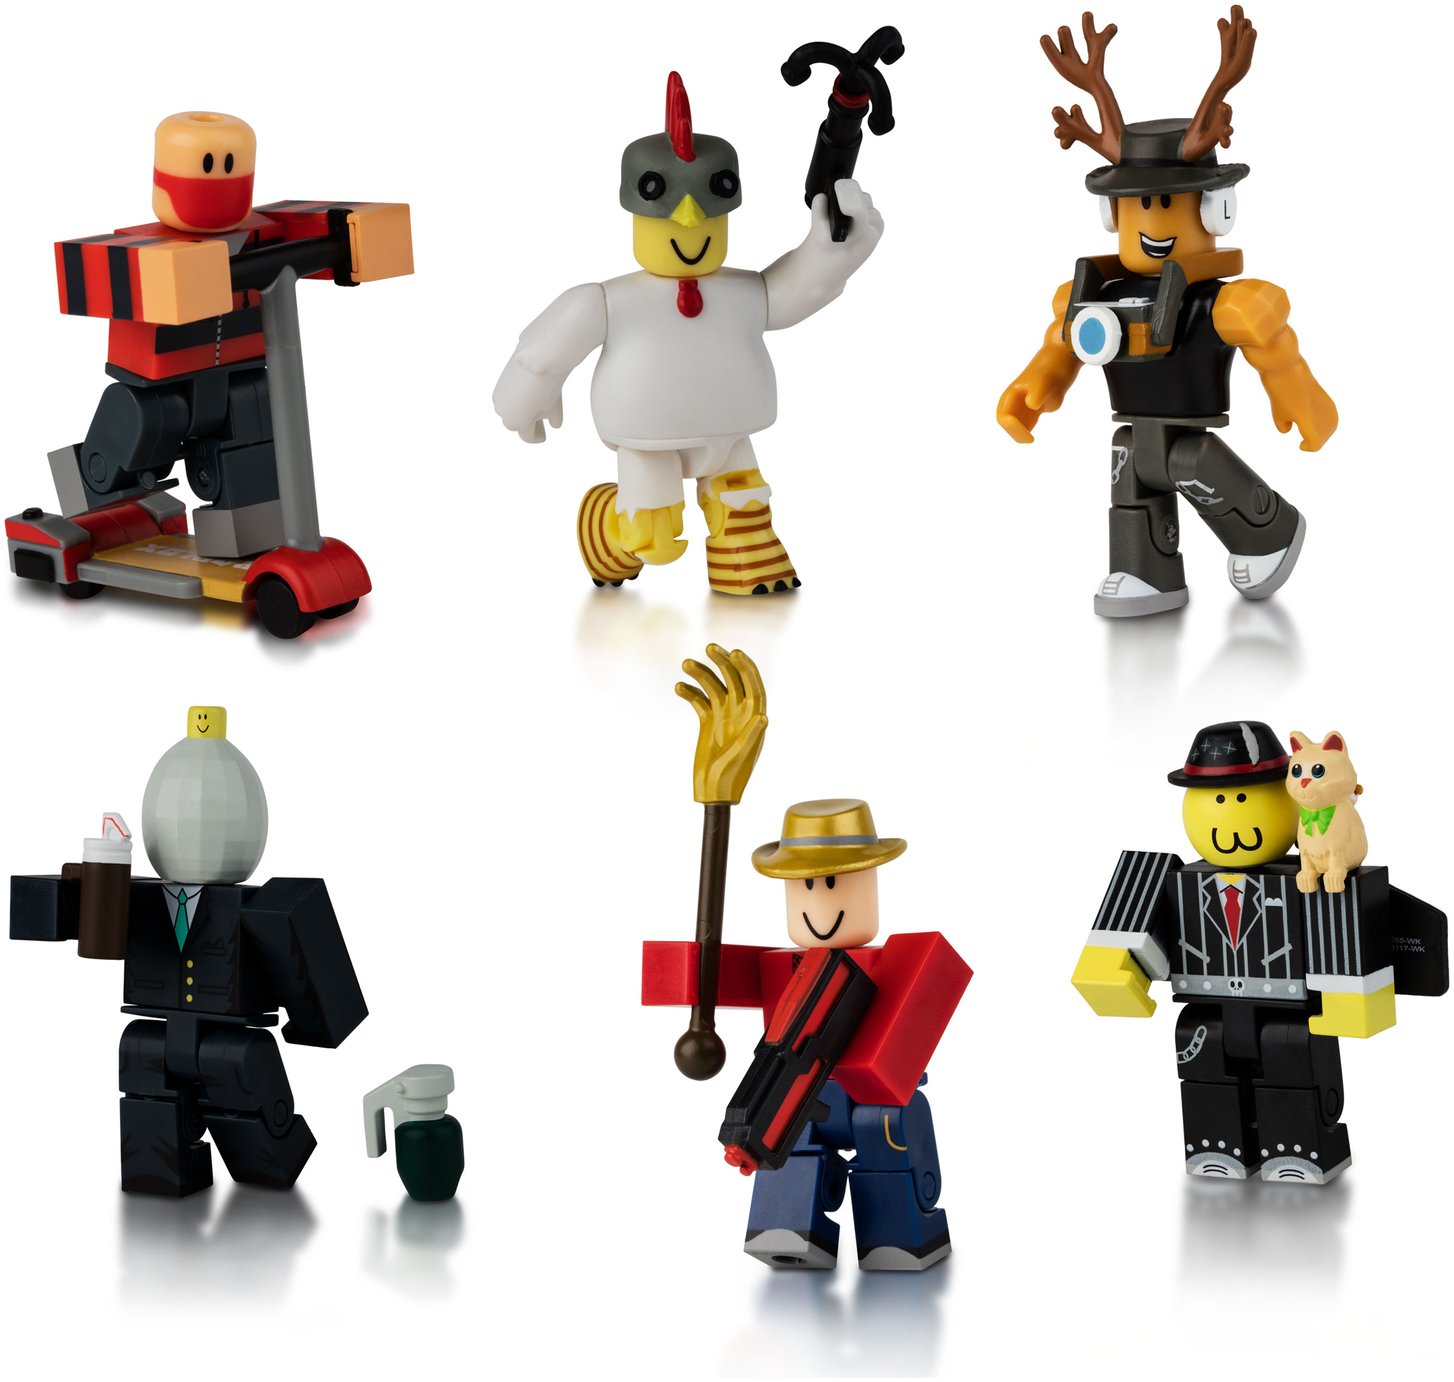 Roblox 6 Figure Multipack Assortment 7077885 Argos Price Tracker Pricehistory Co Uk - buy roblox game pack assortment at argoscouk visit argos